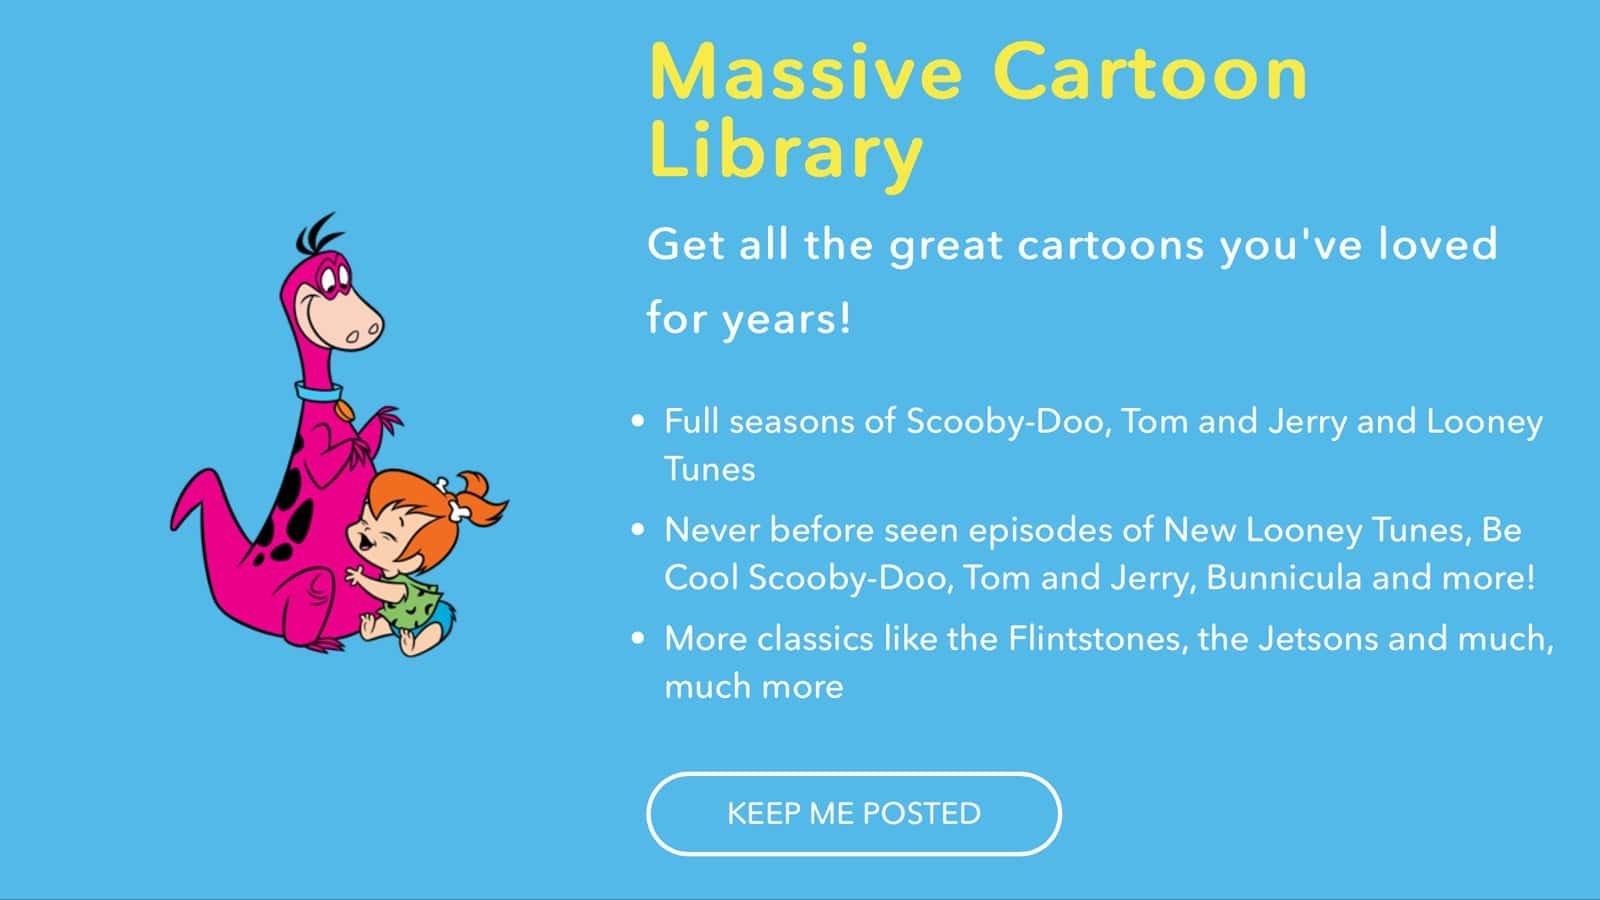 Watch Old Cartoons Online With Boomerang for $5 a Month